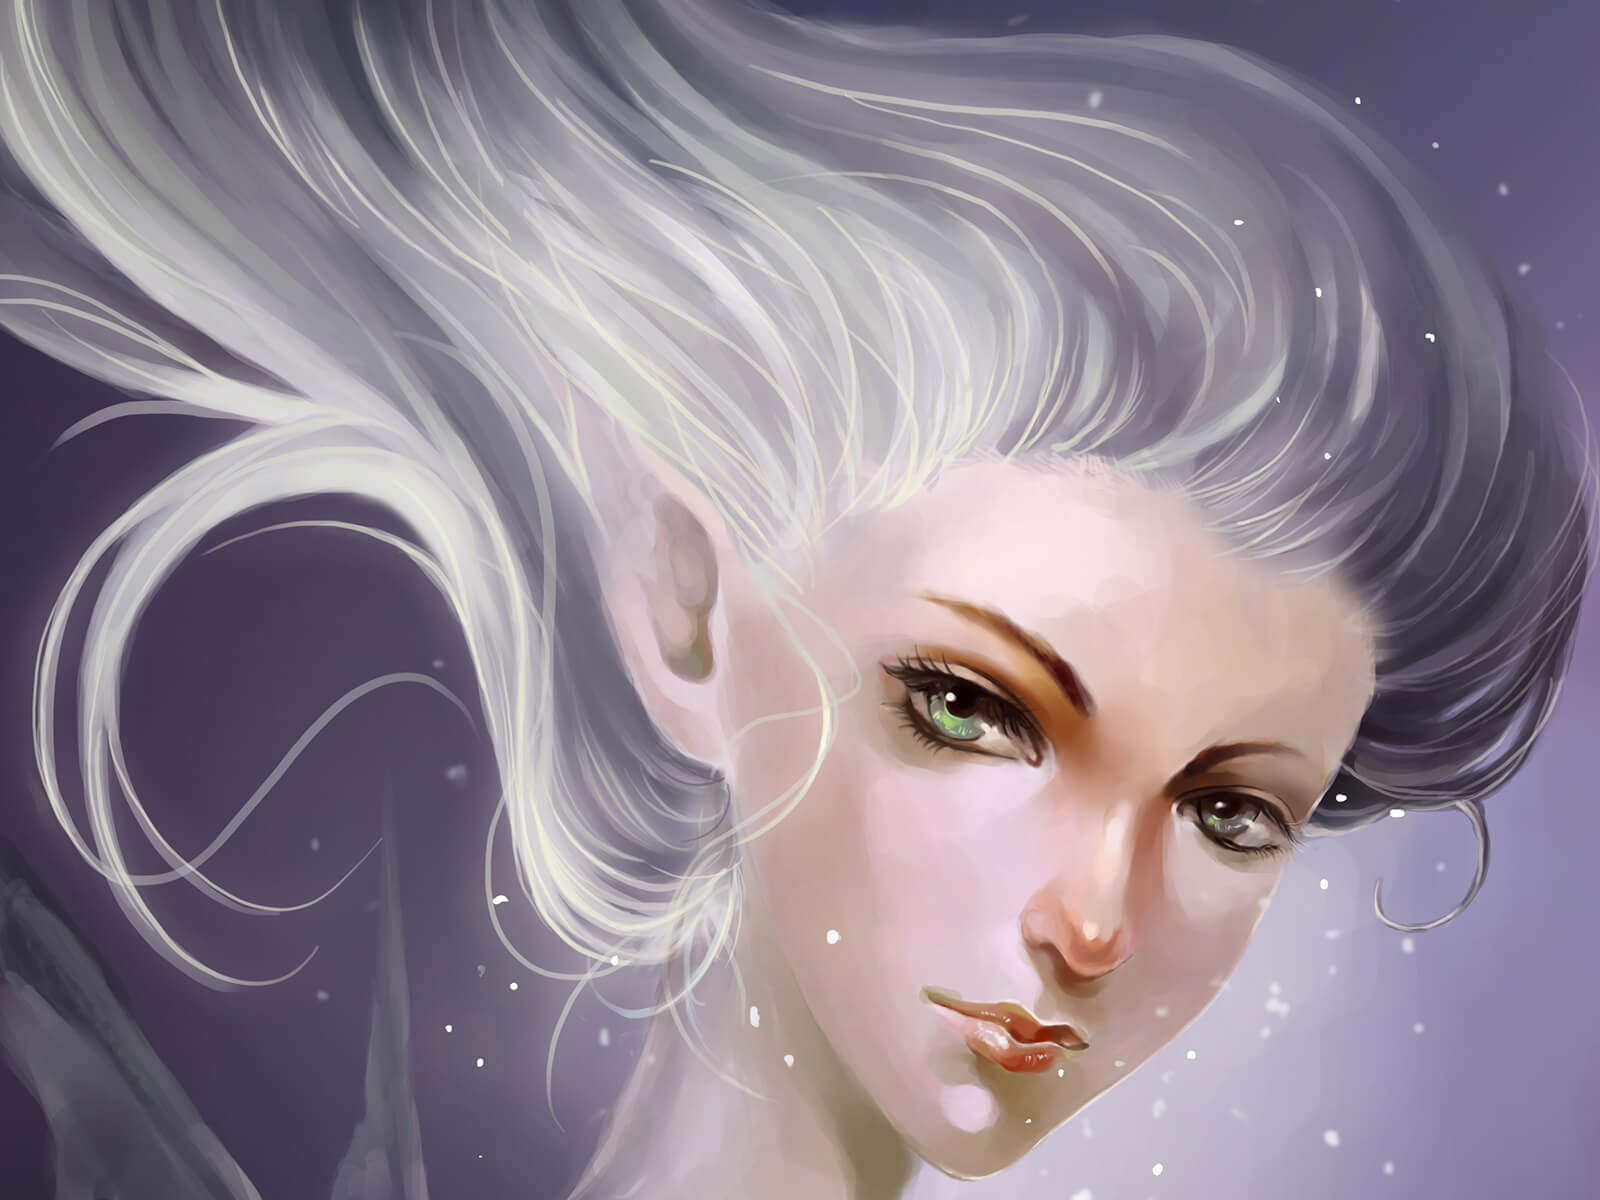 A portrait of a fairy-like character looking over her shoulder at the viewer, her white hair caught in an updraft.